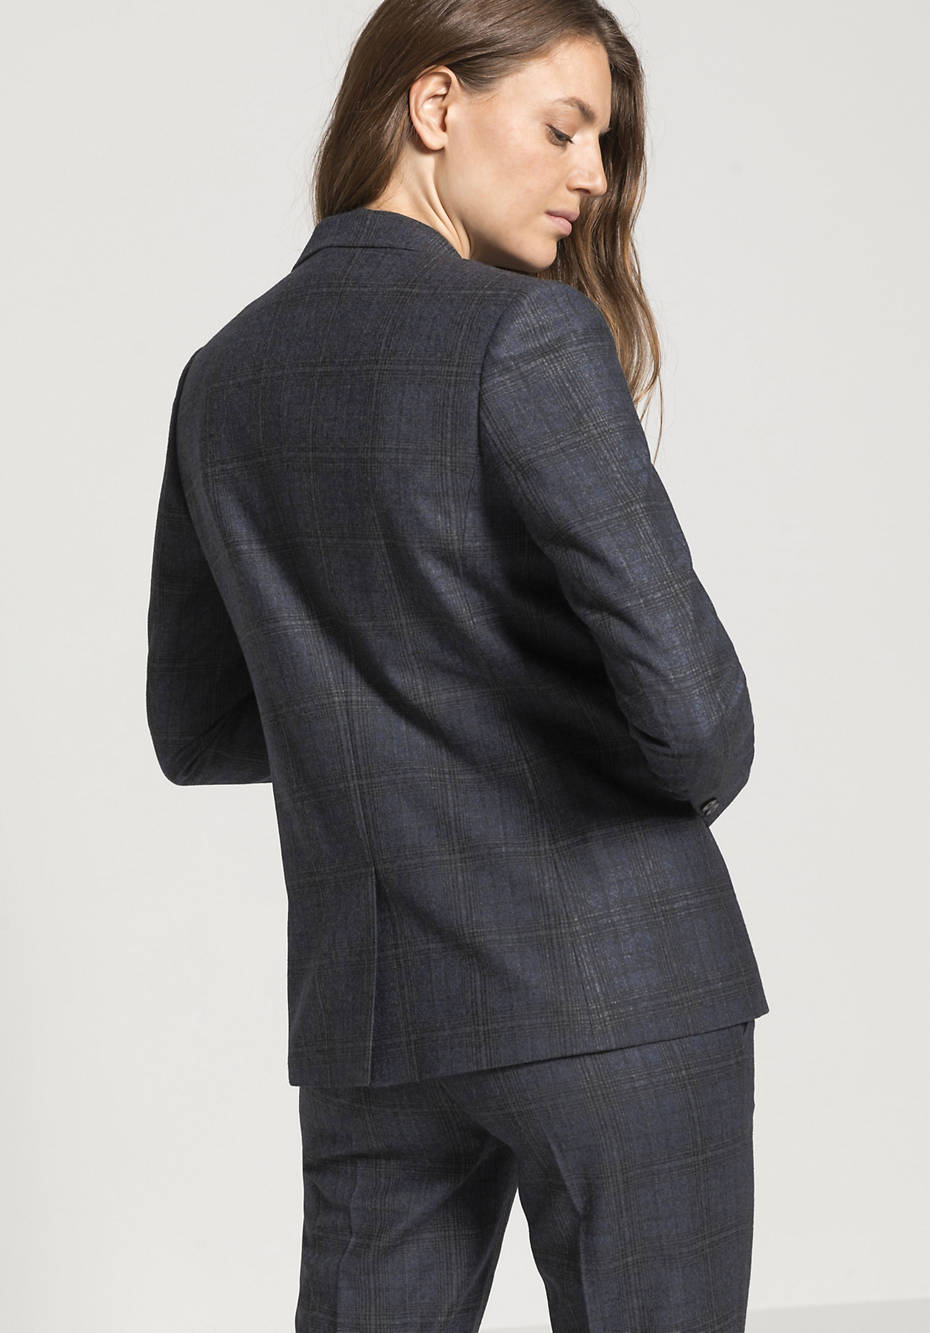 Checked blazer made of pure new wool